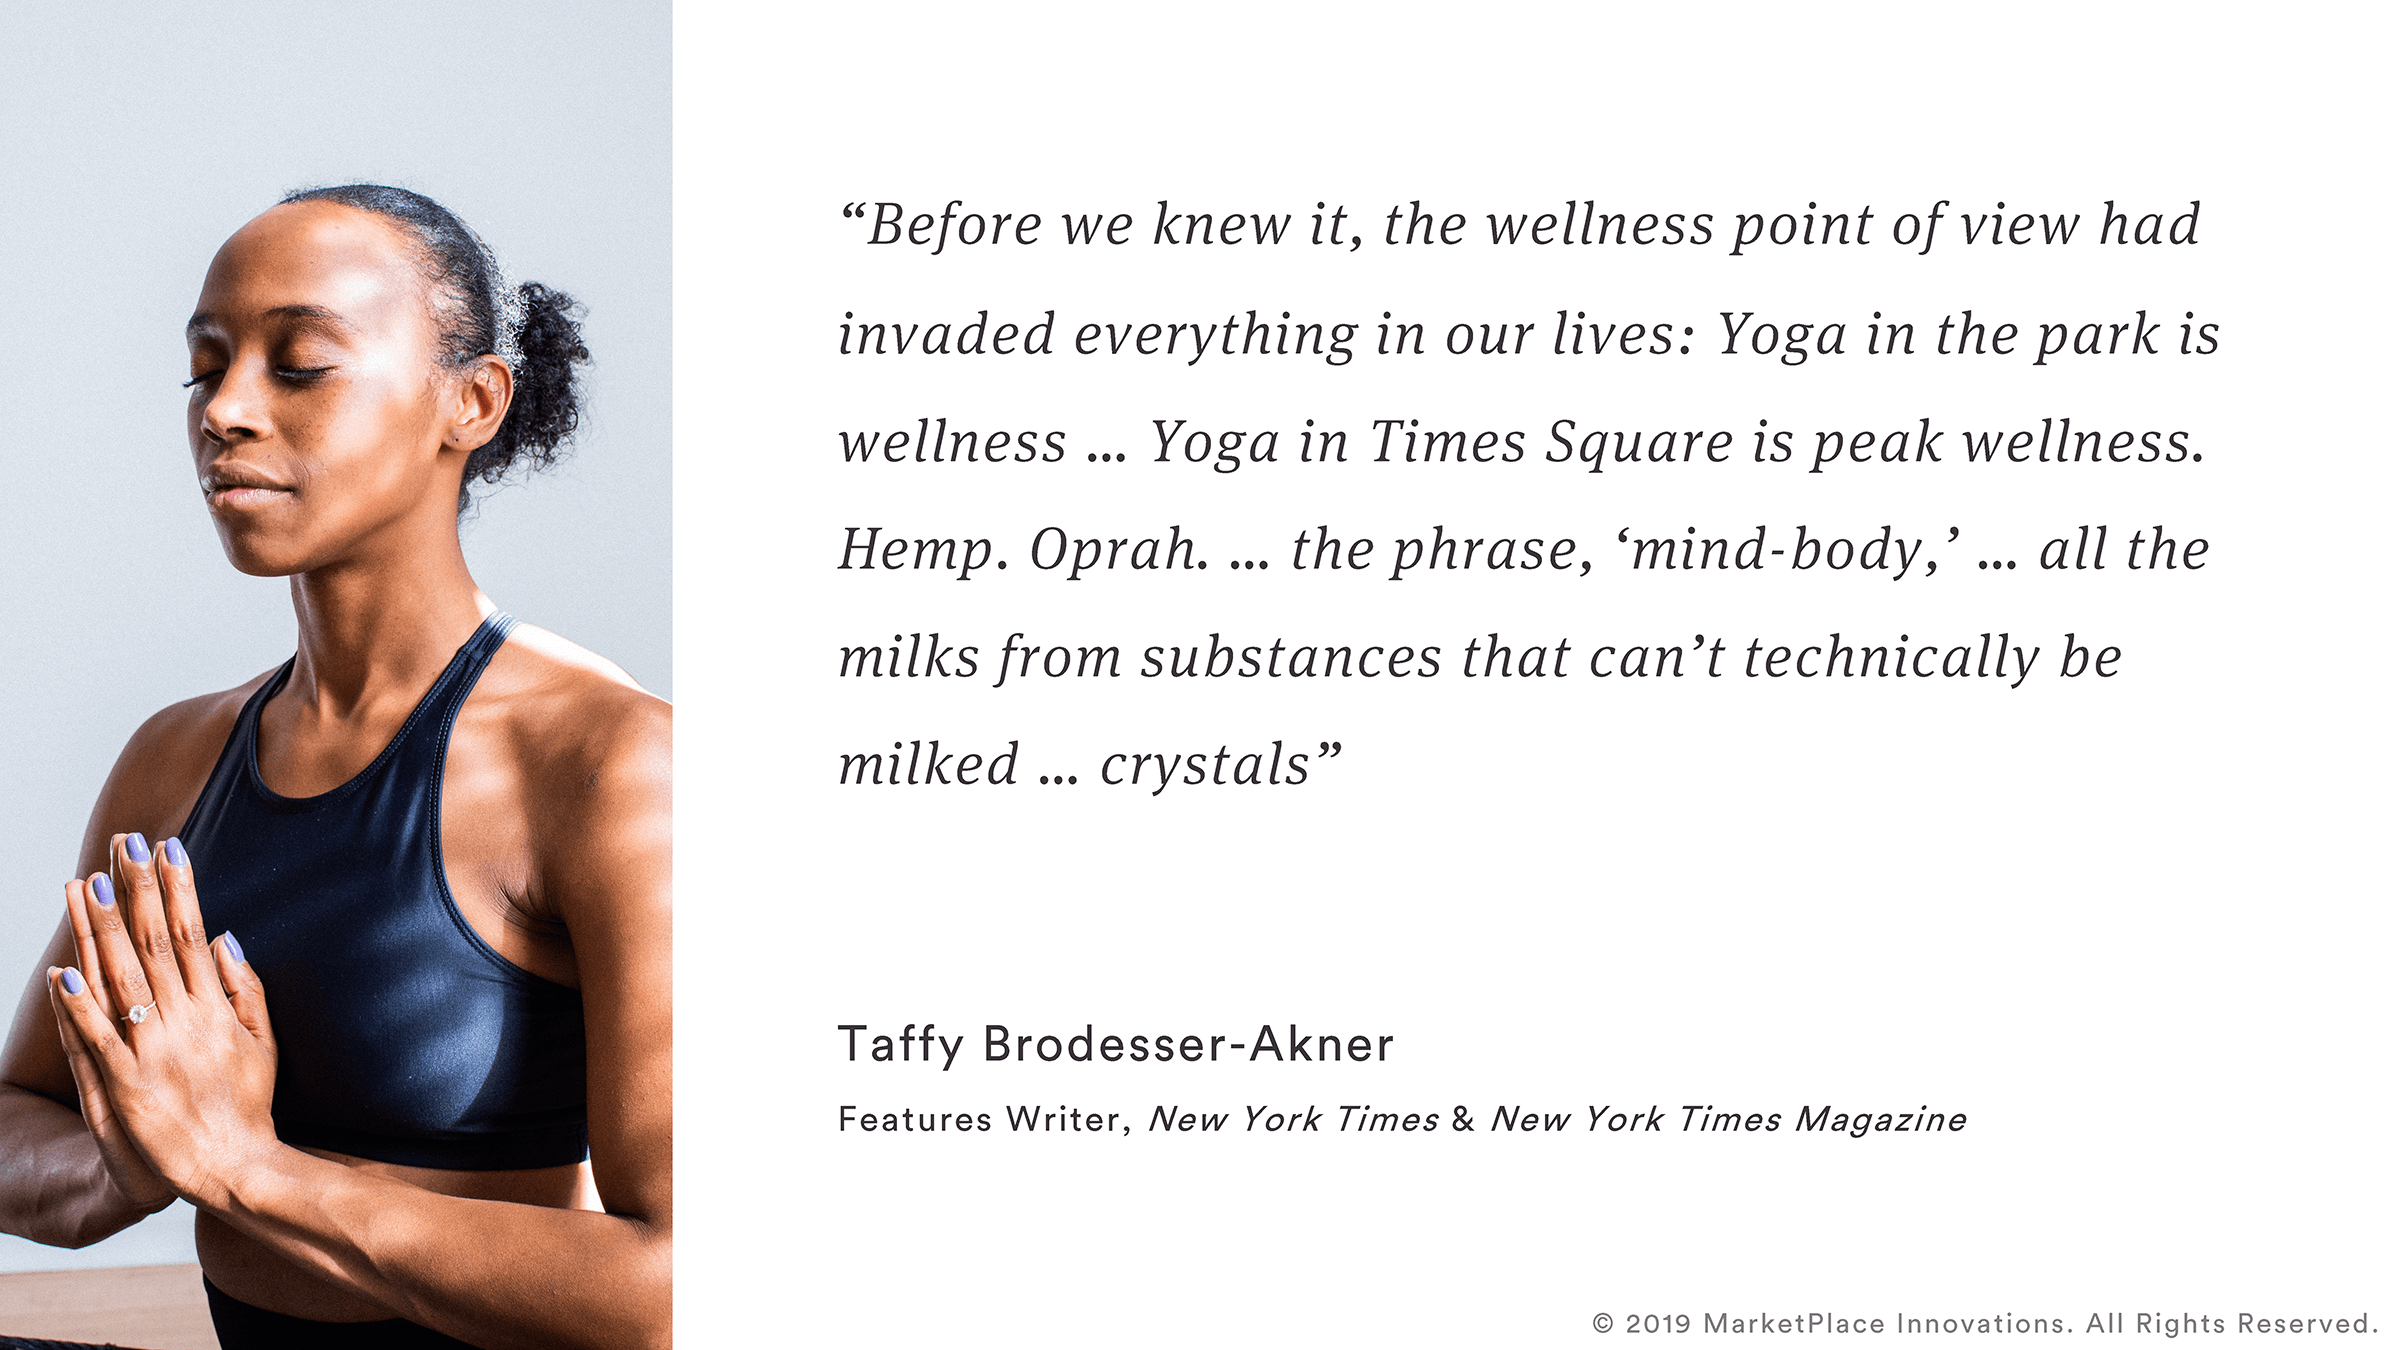 taffy brodesser-akner quote on wellness